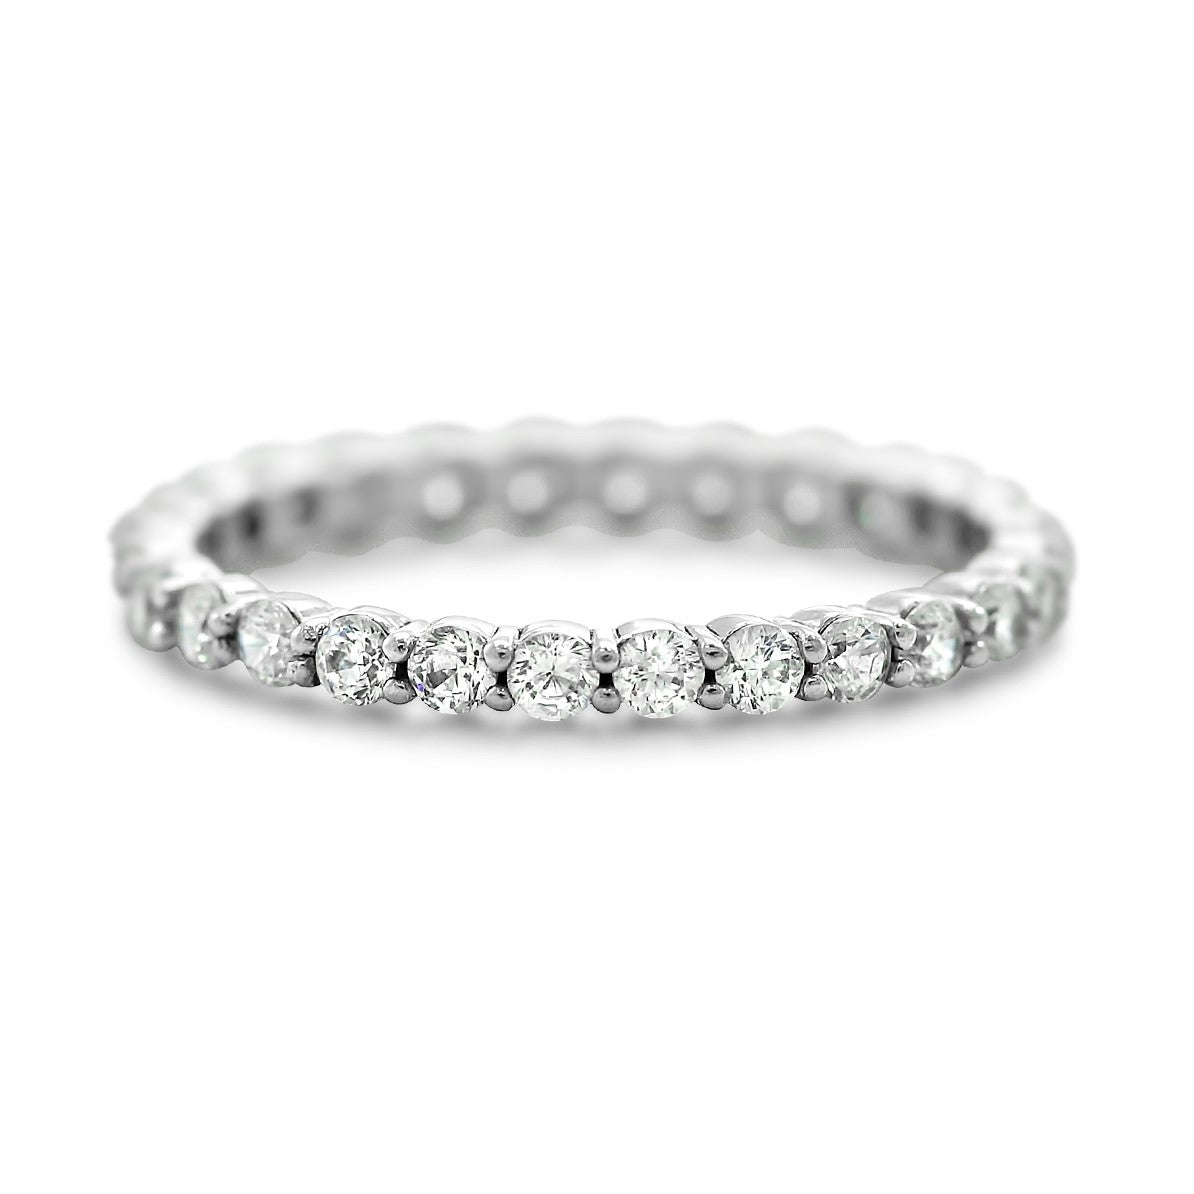 2.0mm eternity band ~0.87tcw diamonds available in platinum or 14k yellow, white or rose gold